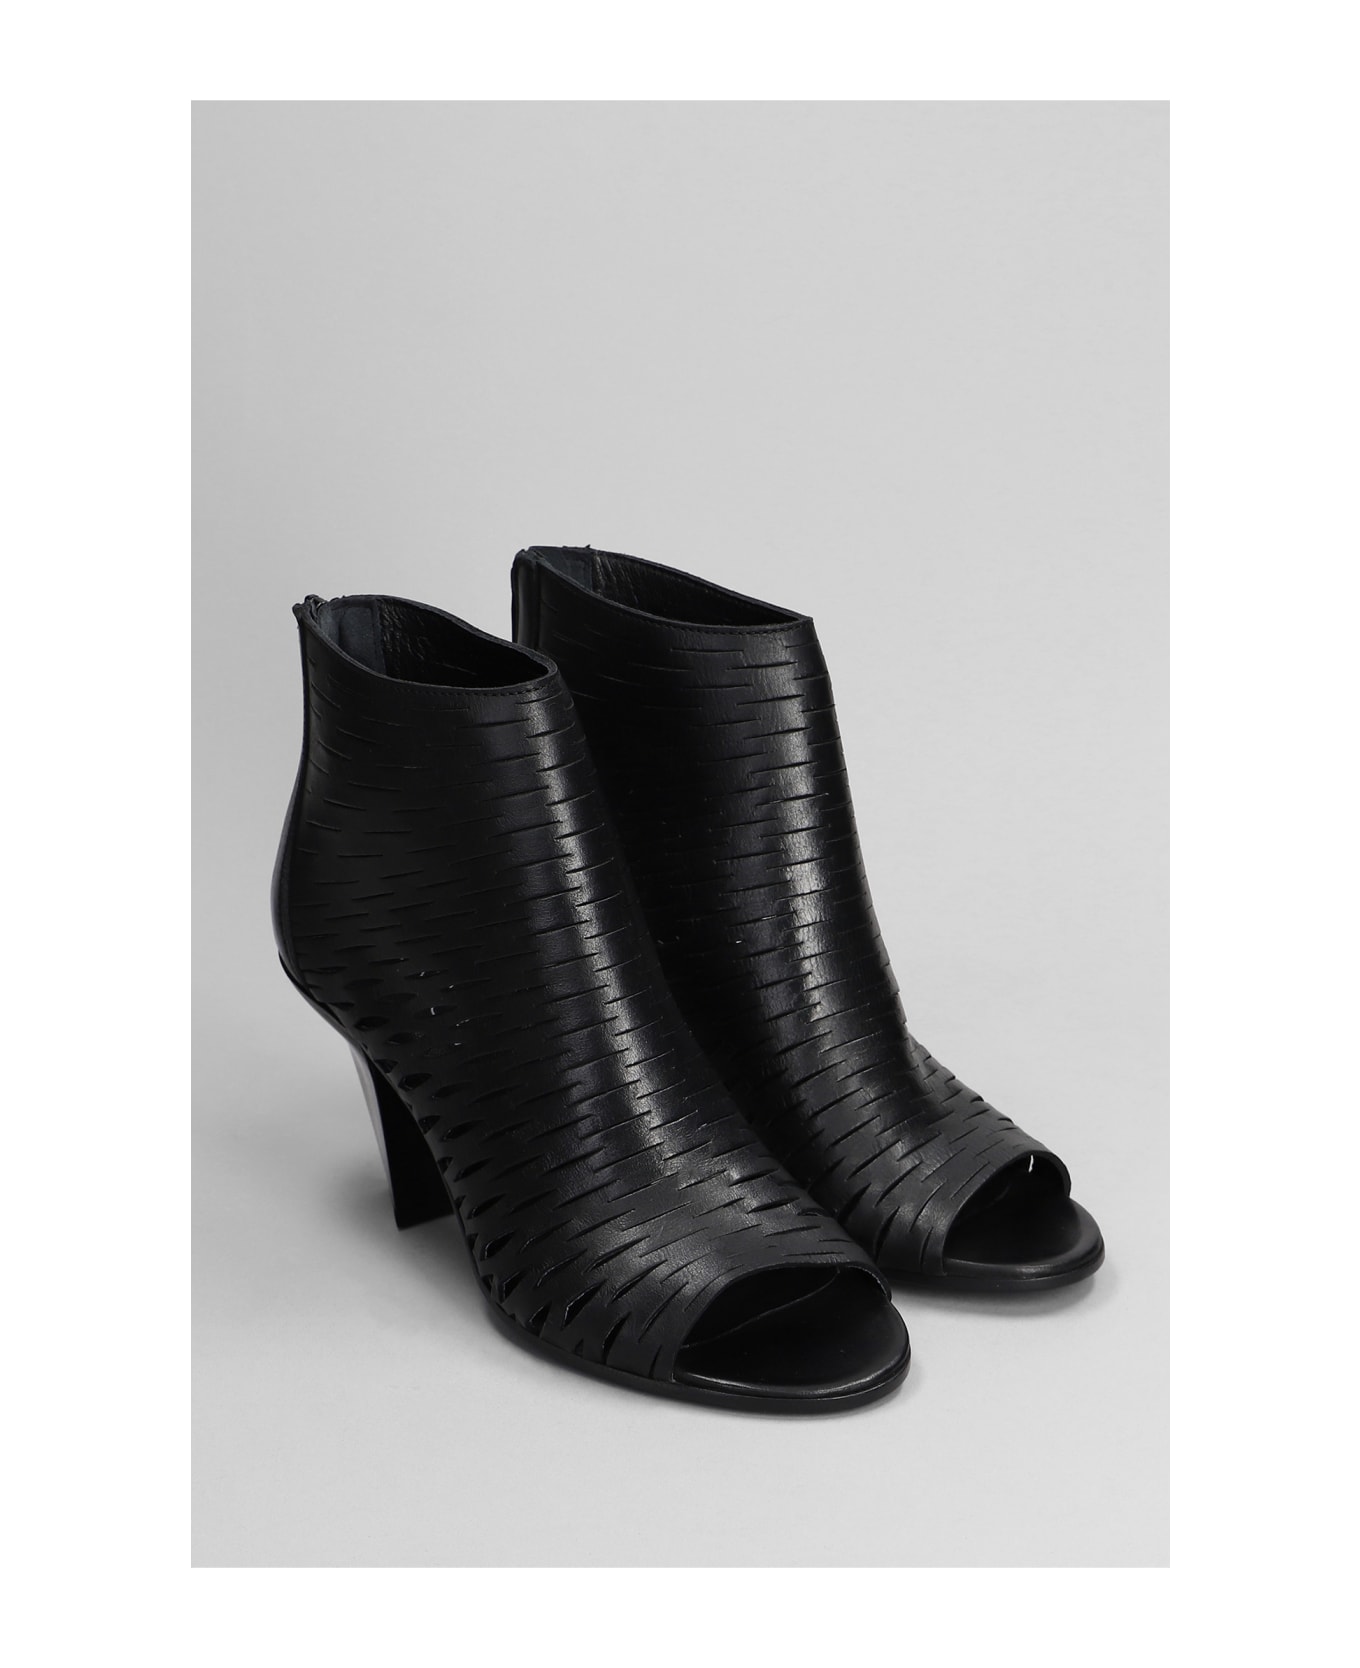 Elena Iachi High Heels Ankle Boots In Black Leather - black